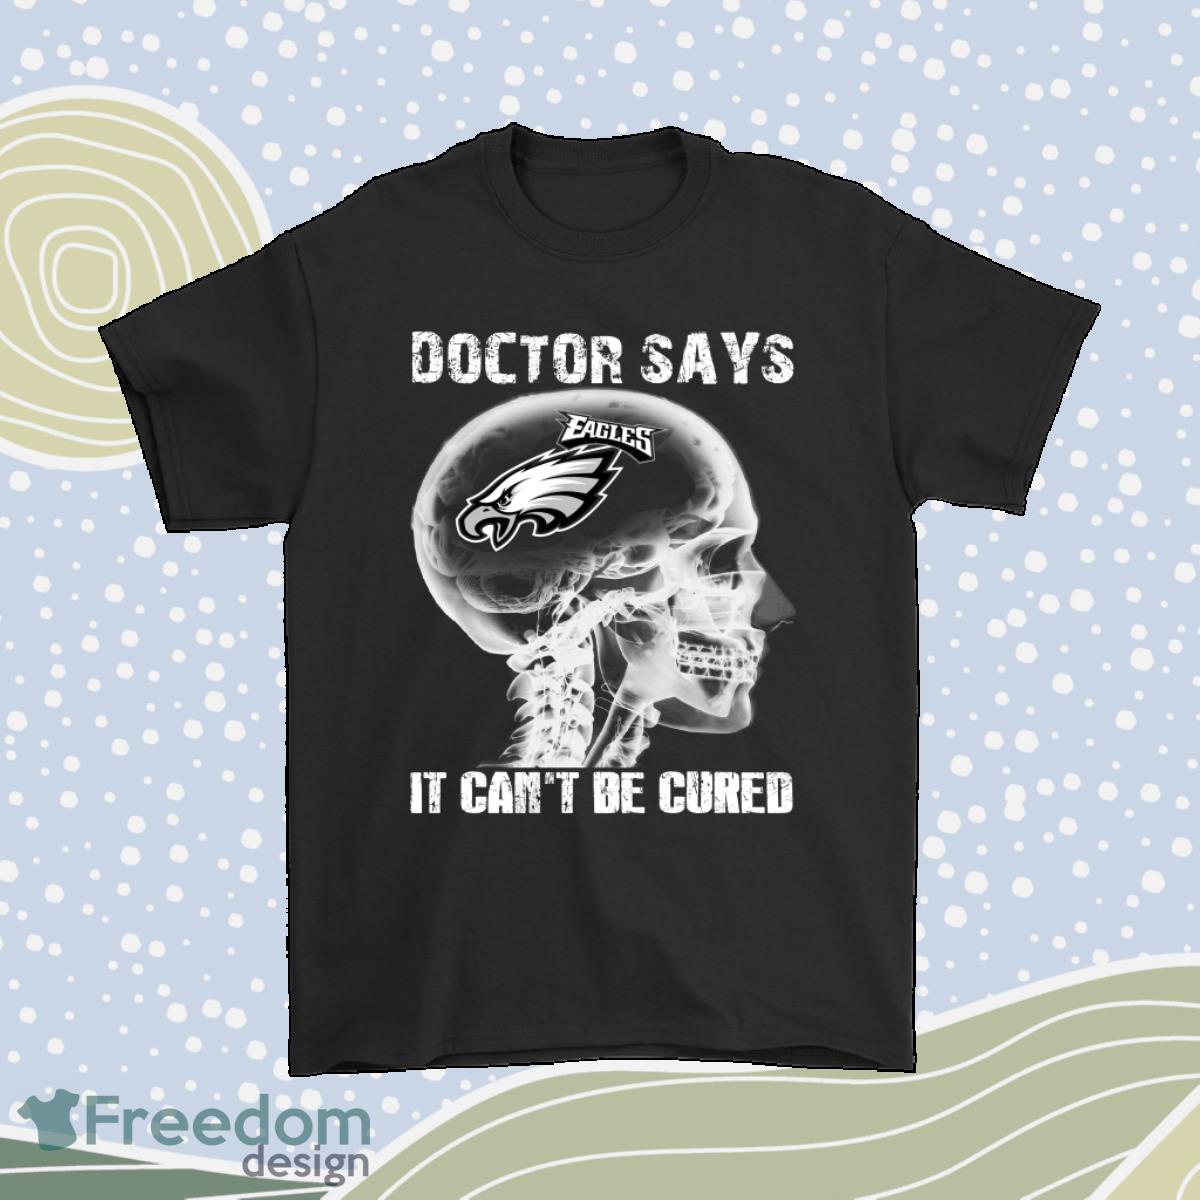 Doctor Says It Cant Be Cured Philadelphia Eagles Shirt Product Photo 1